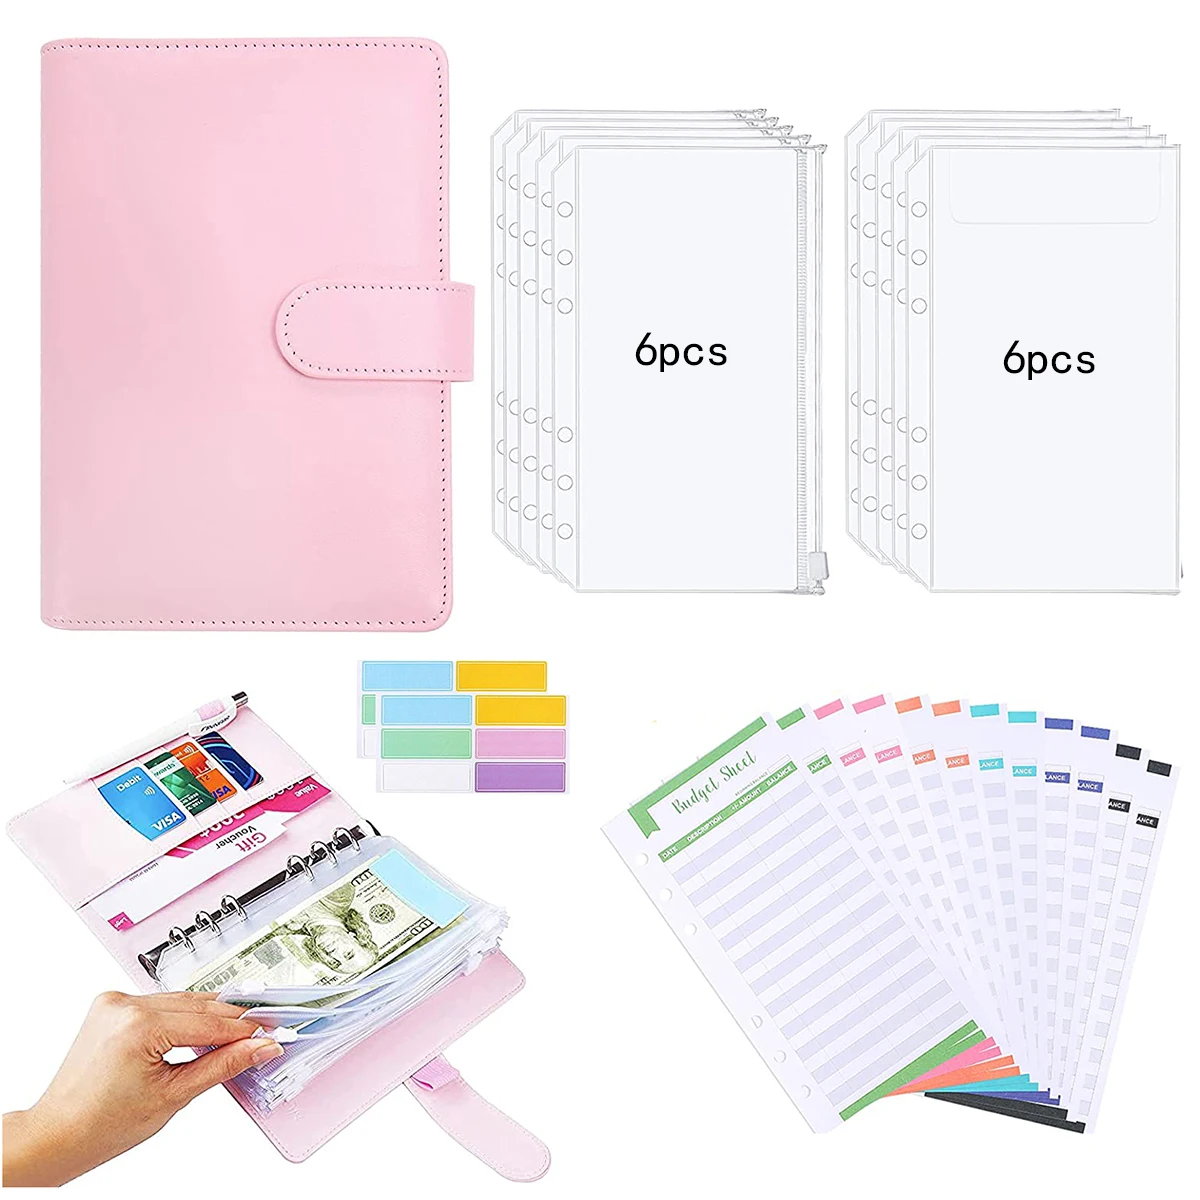 27 Pieces Budget Binder with Cash Envelopes Budget Wallet,10 Pieces Clear Cash Envelopes & 12 Pieces Budget Sheets and Stickers